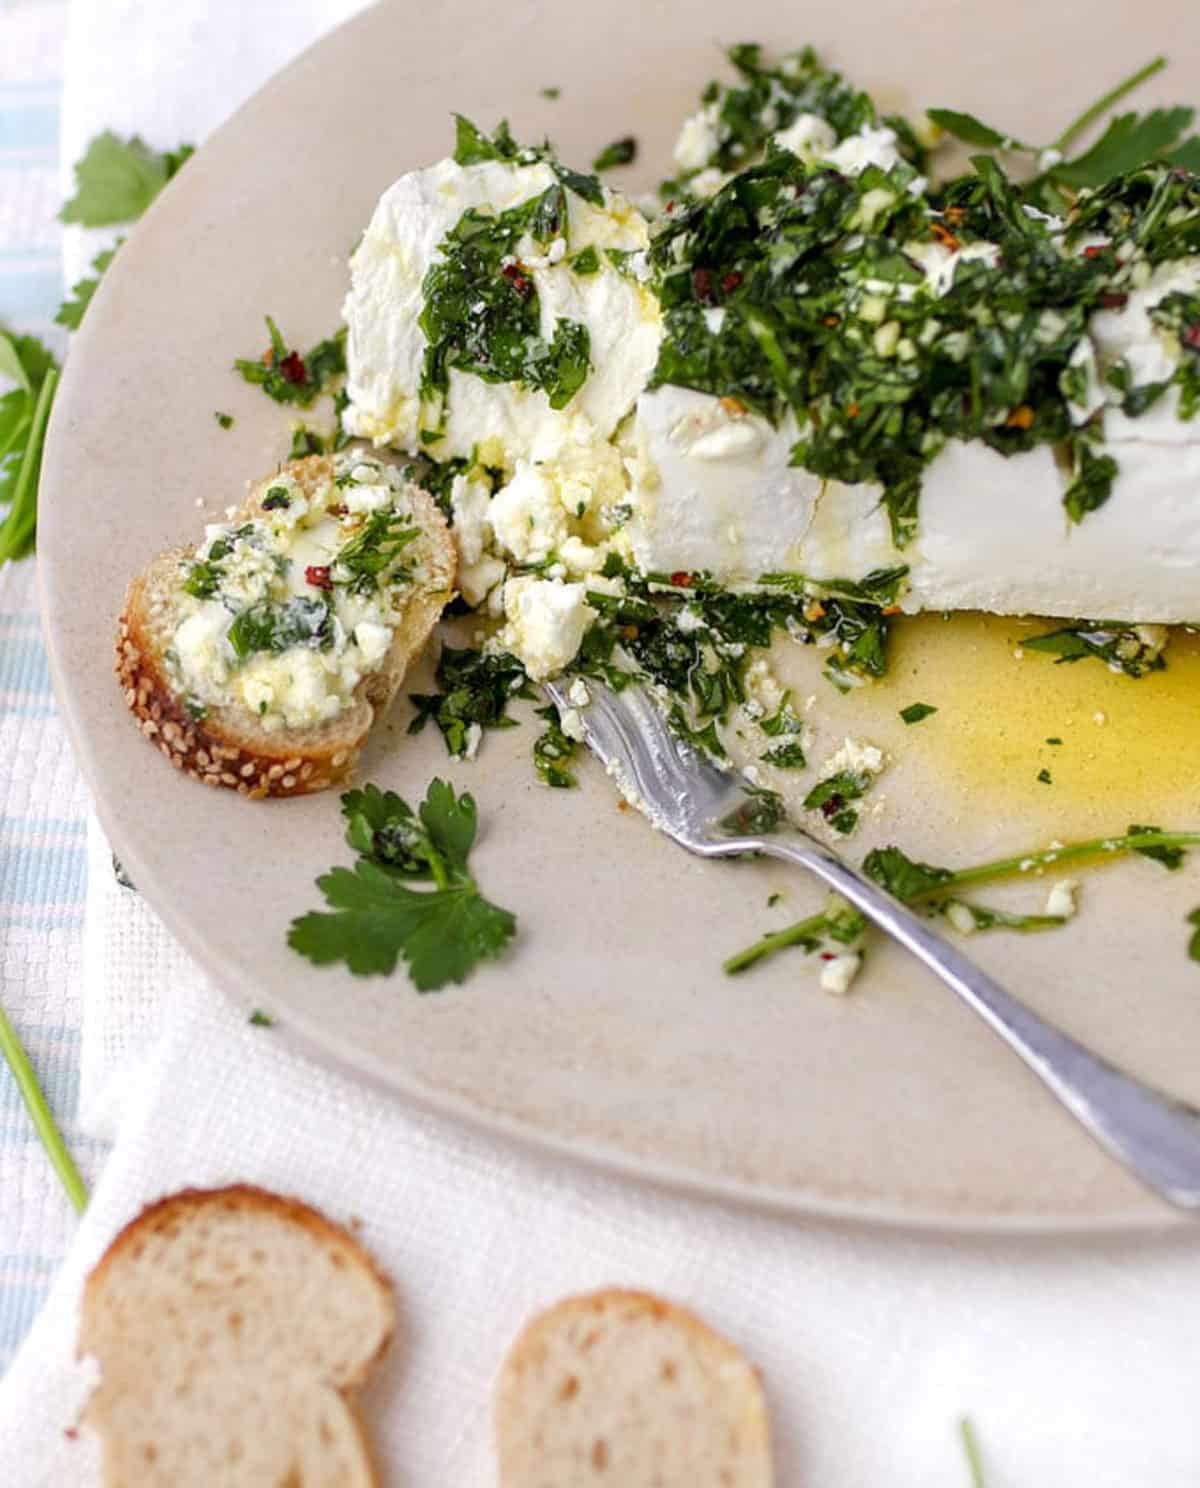 Log of goat cheese topped with parsley and olive oil, on a platter